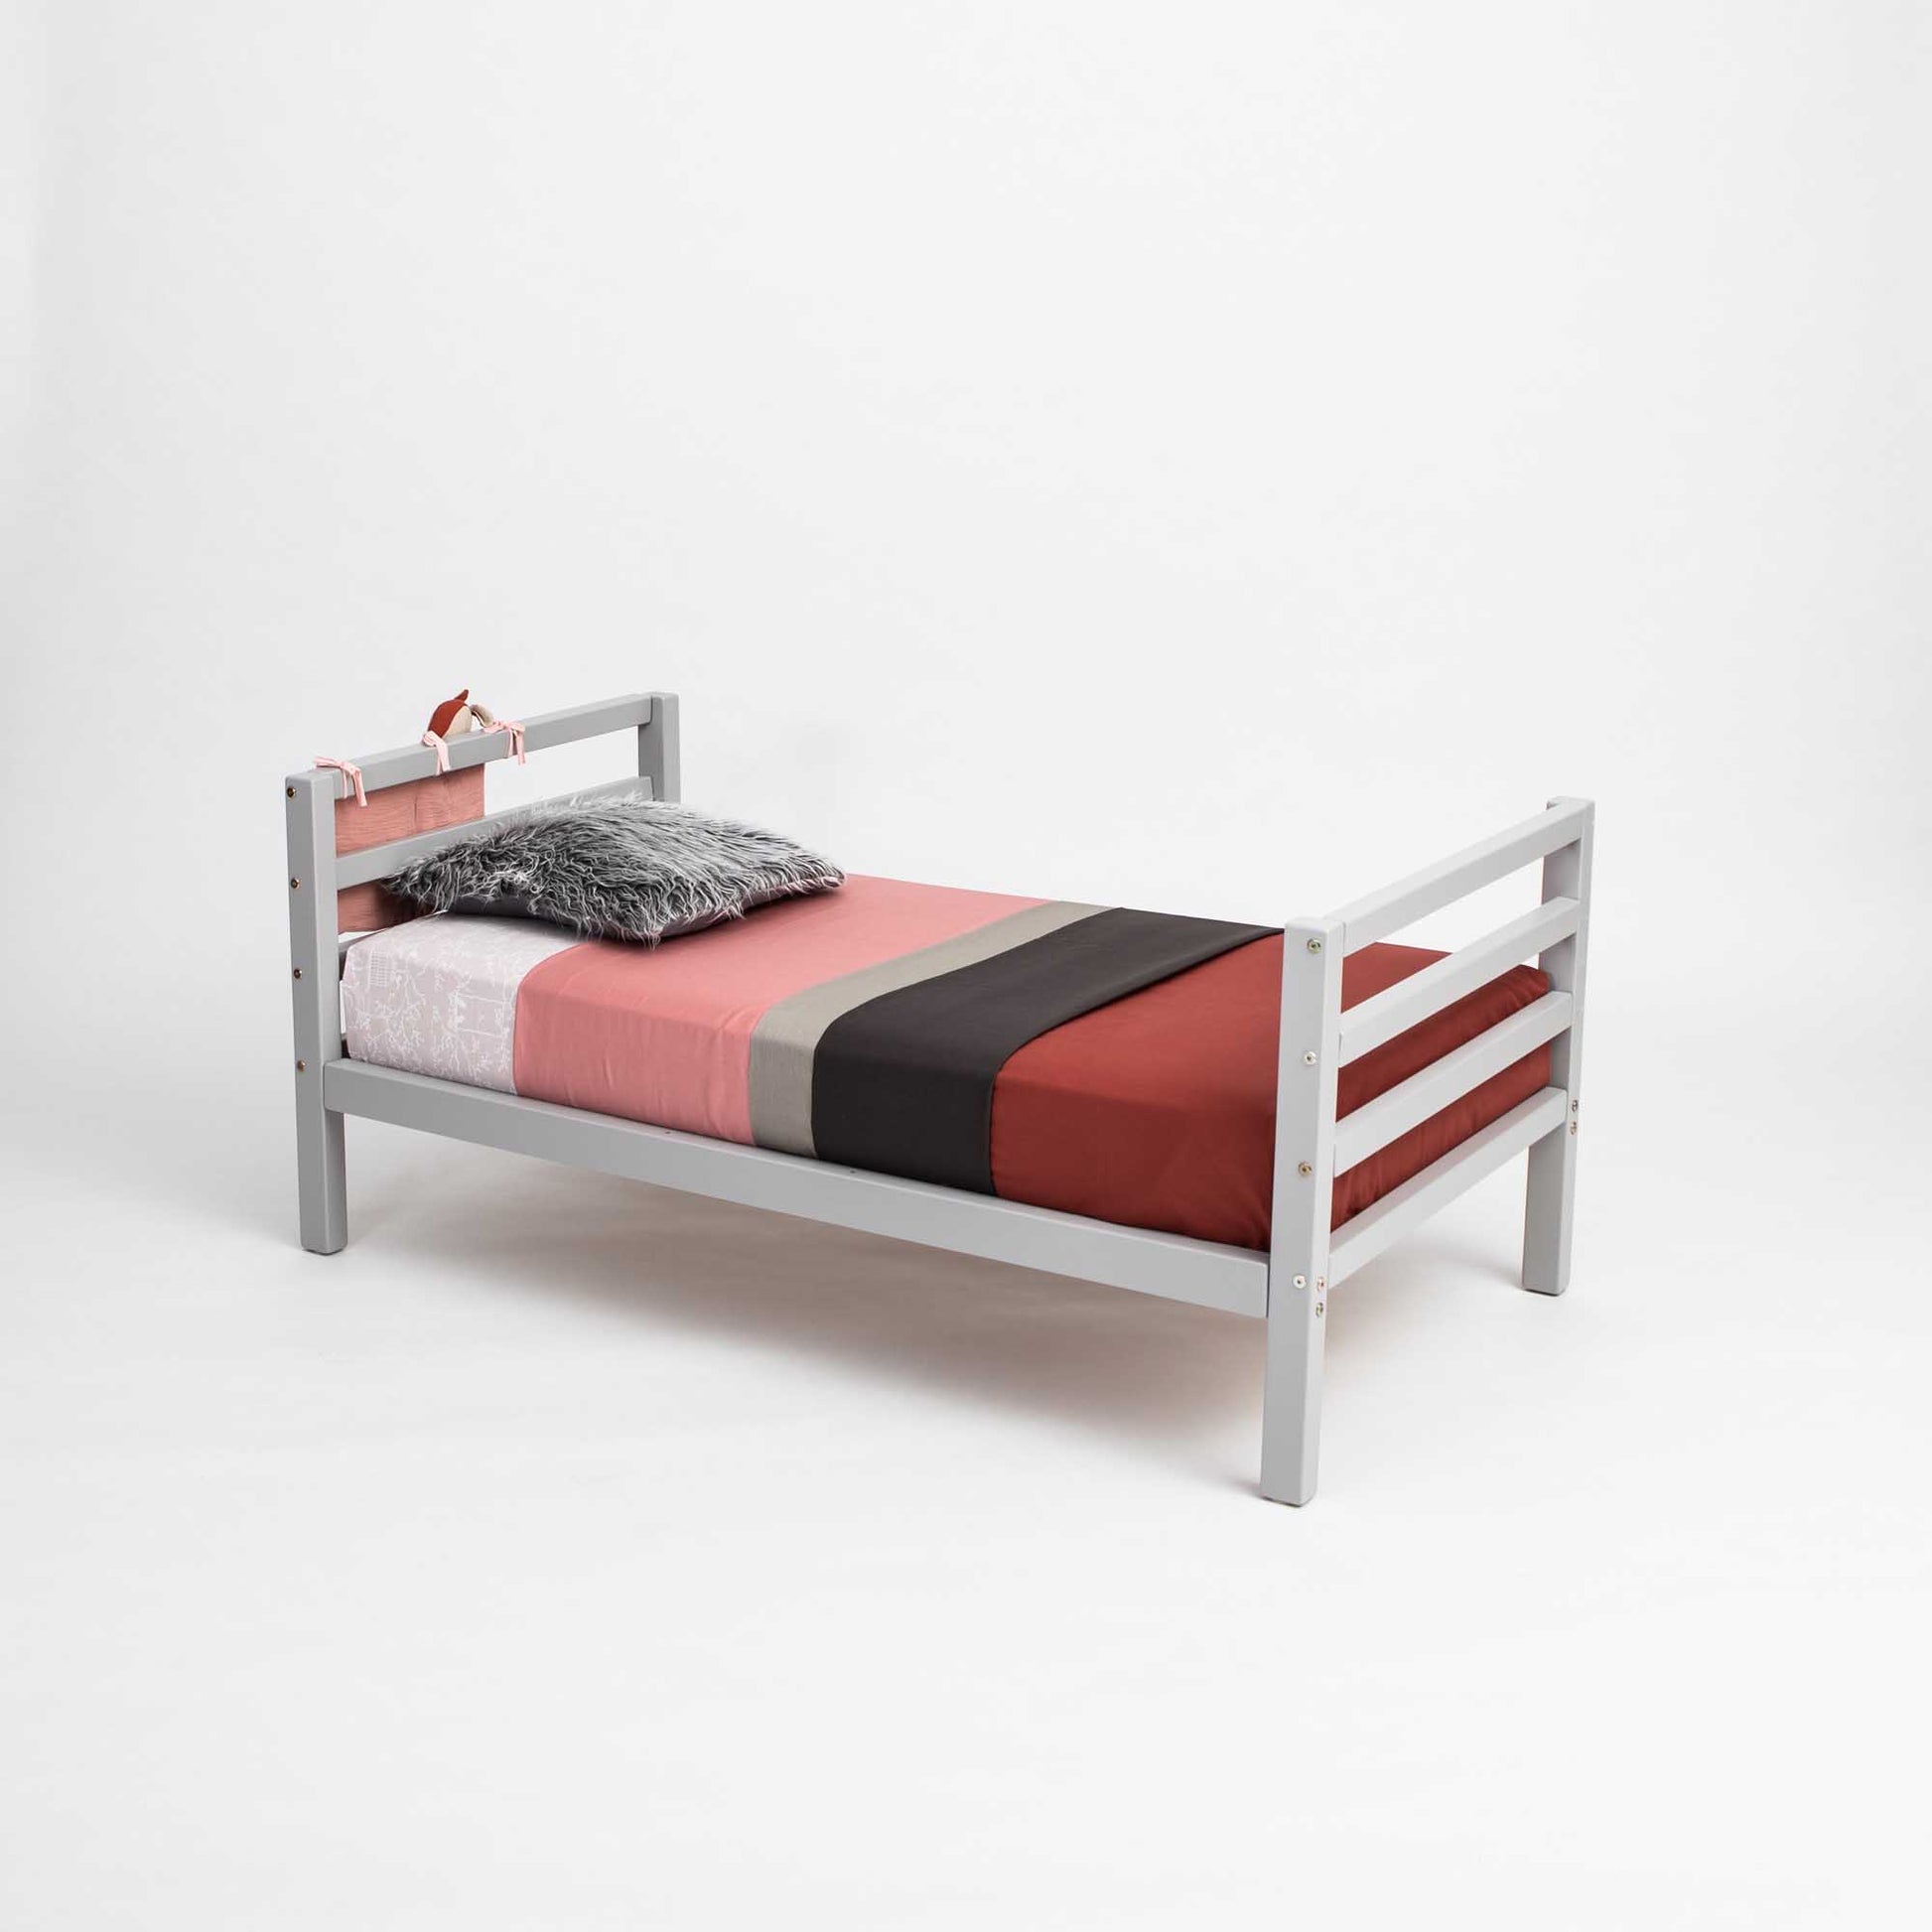 A long-lasting Sweet Home From Wood 2-in-1 kid's bed with a gray frame and red and black bedding that grows with the child.